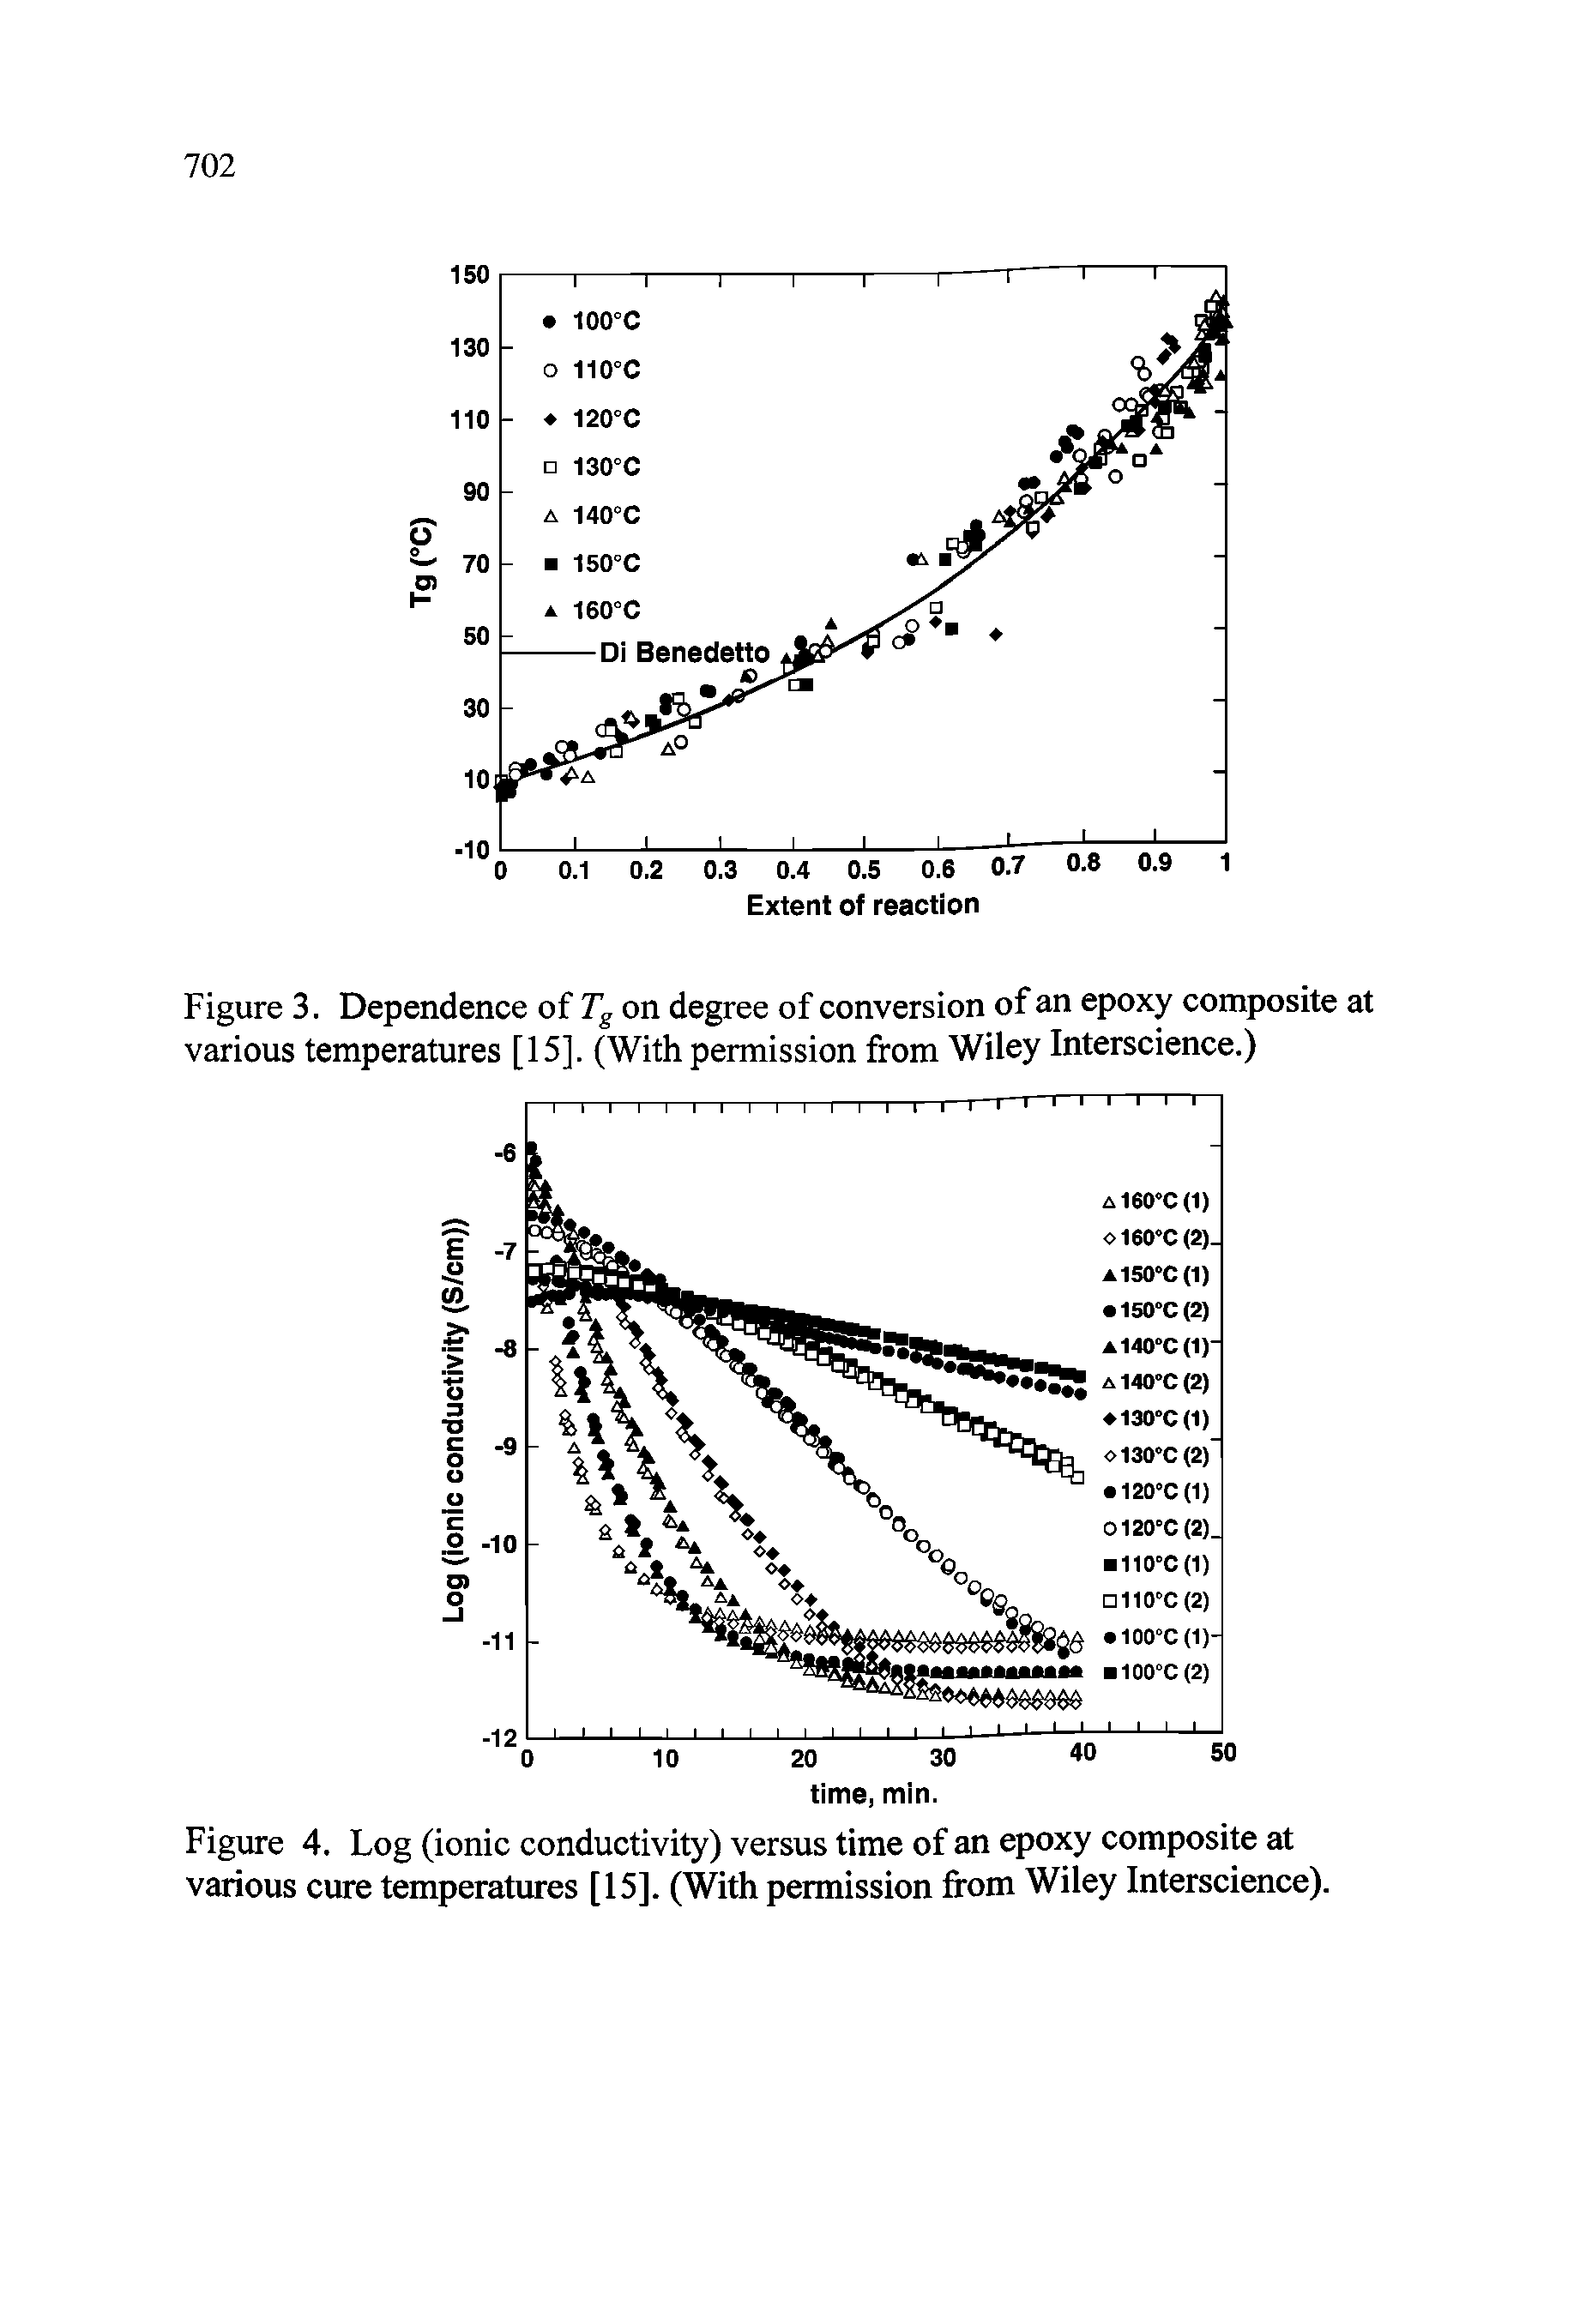 Figure 4. Log (ionic conductivity) versus time of an epoxy composite at various cure temperatures [15]. (With permission from Wiley Interscience).